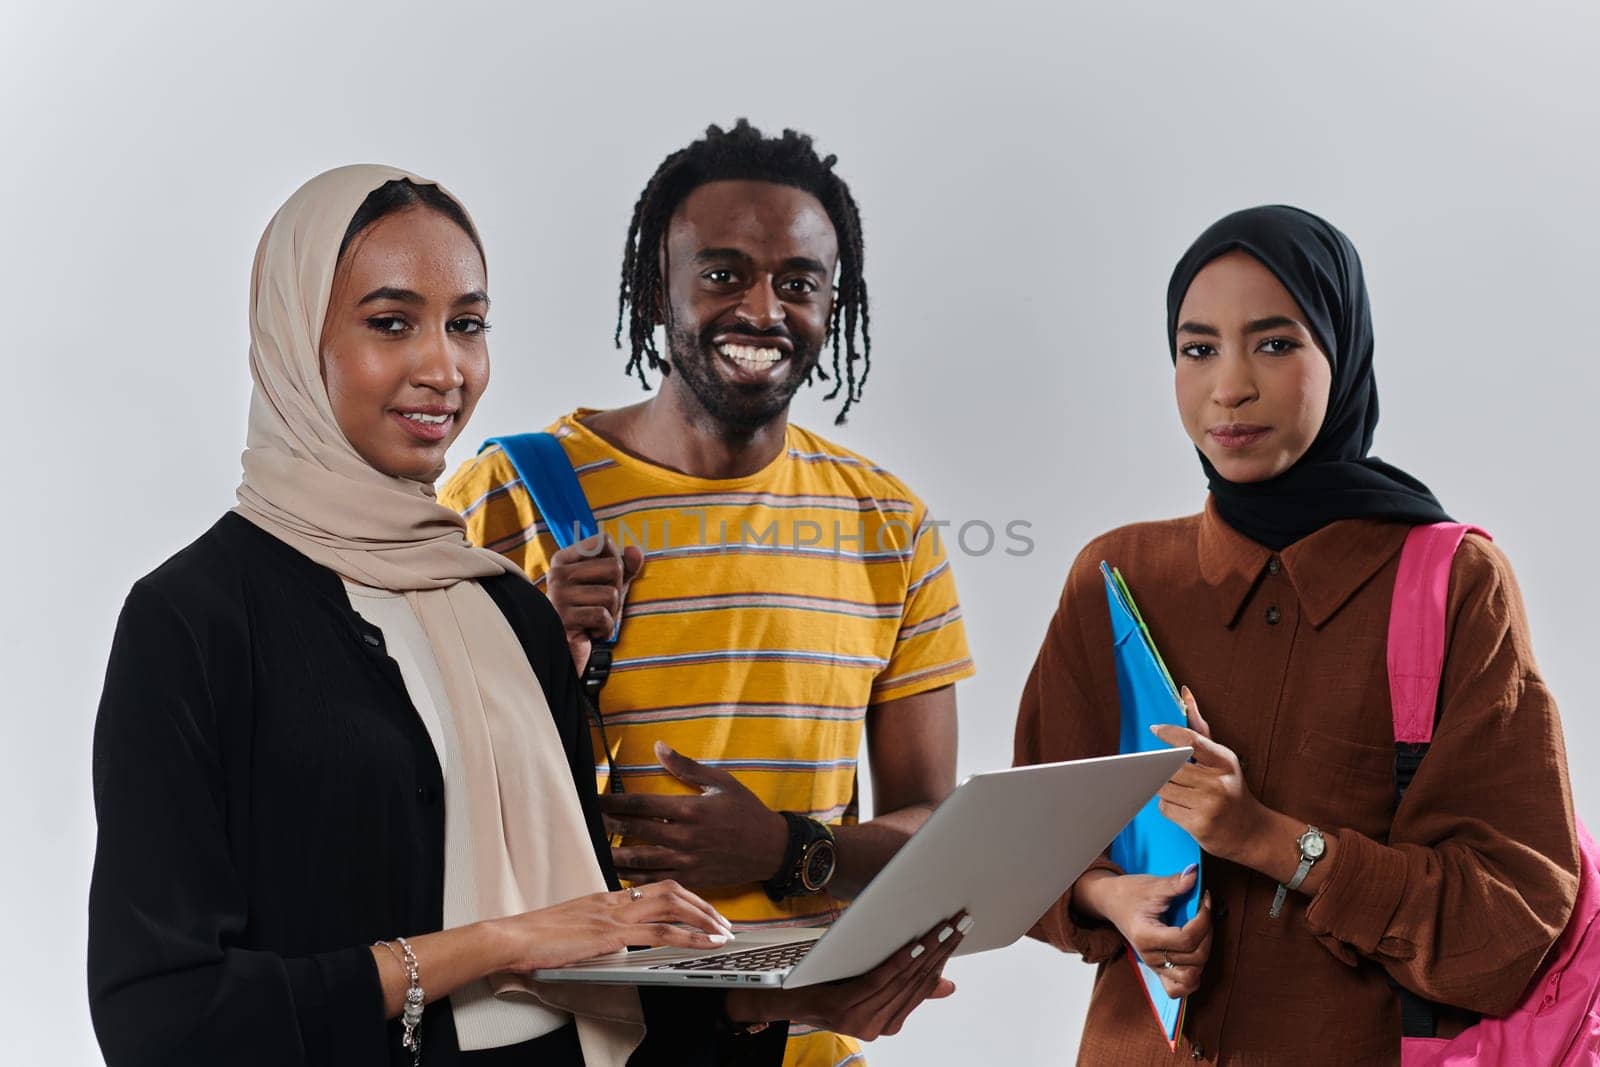 A group of students, including an African American student and two hijab-wearing women, stand united against a pristine white background, symbolizing a harmonious blend of cultures and backgrounds in the pursuit of knowledge and academic excellence.